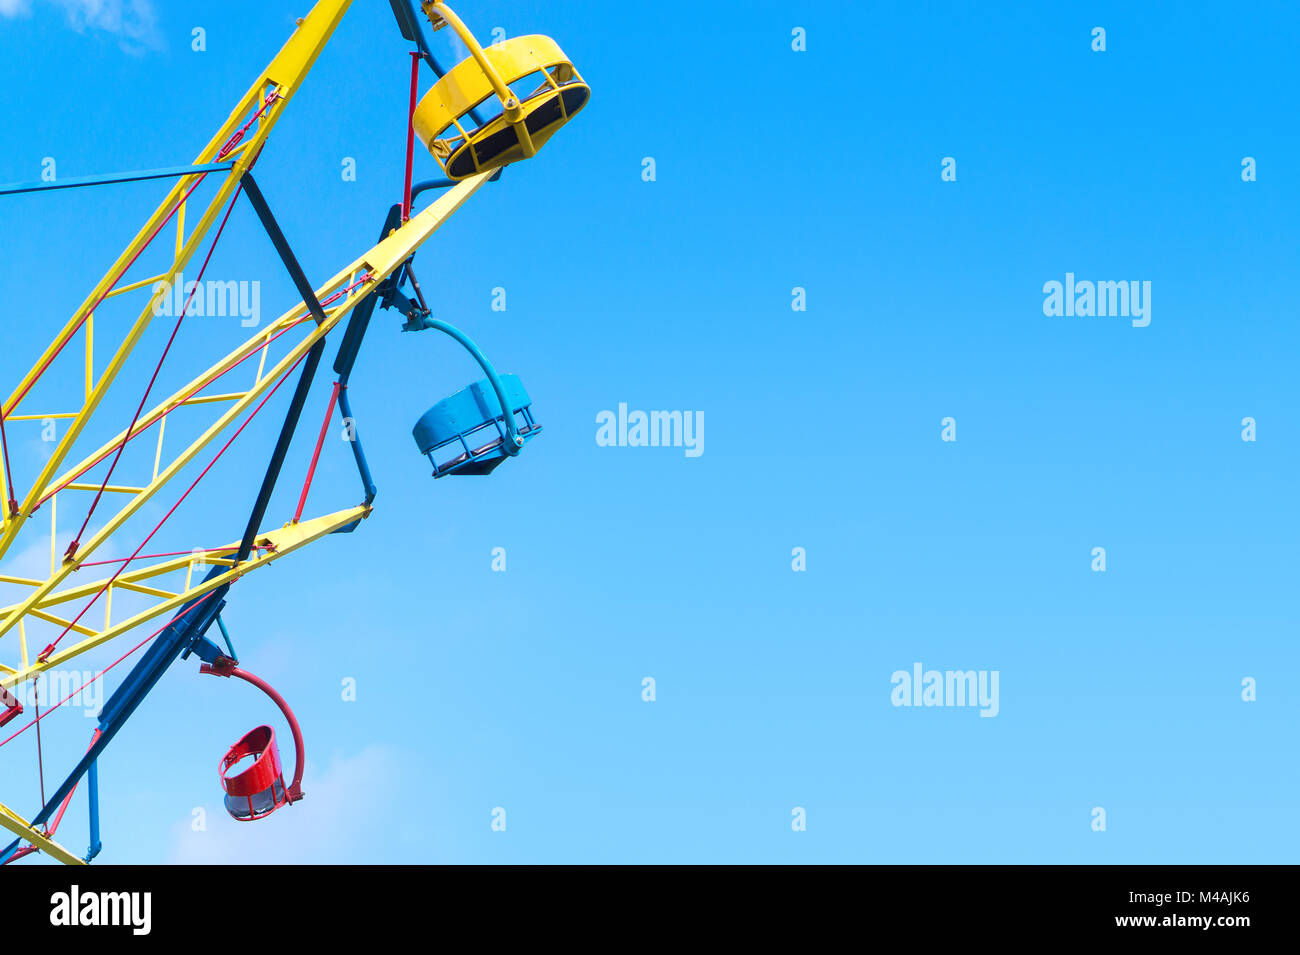 Amusement park background template with negative copy space. Colorful theme park ride against clear blue sky in summer. Stock Photo